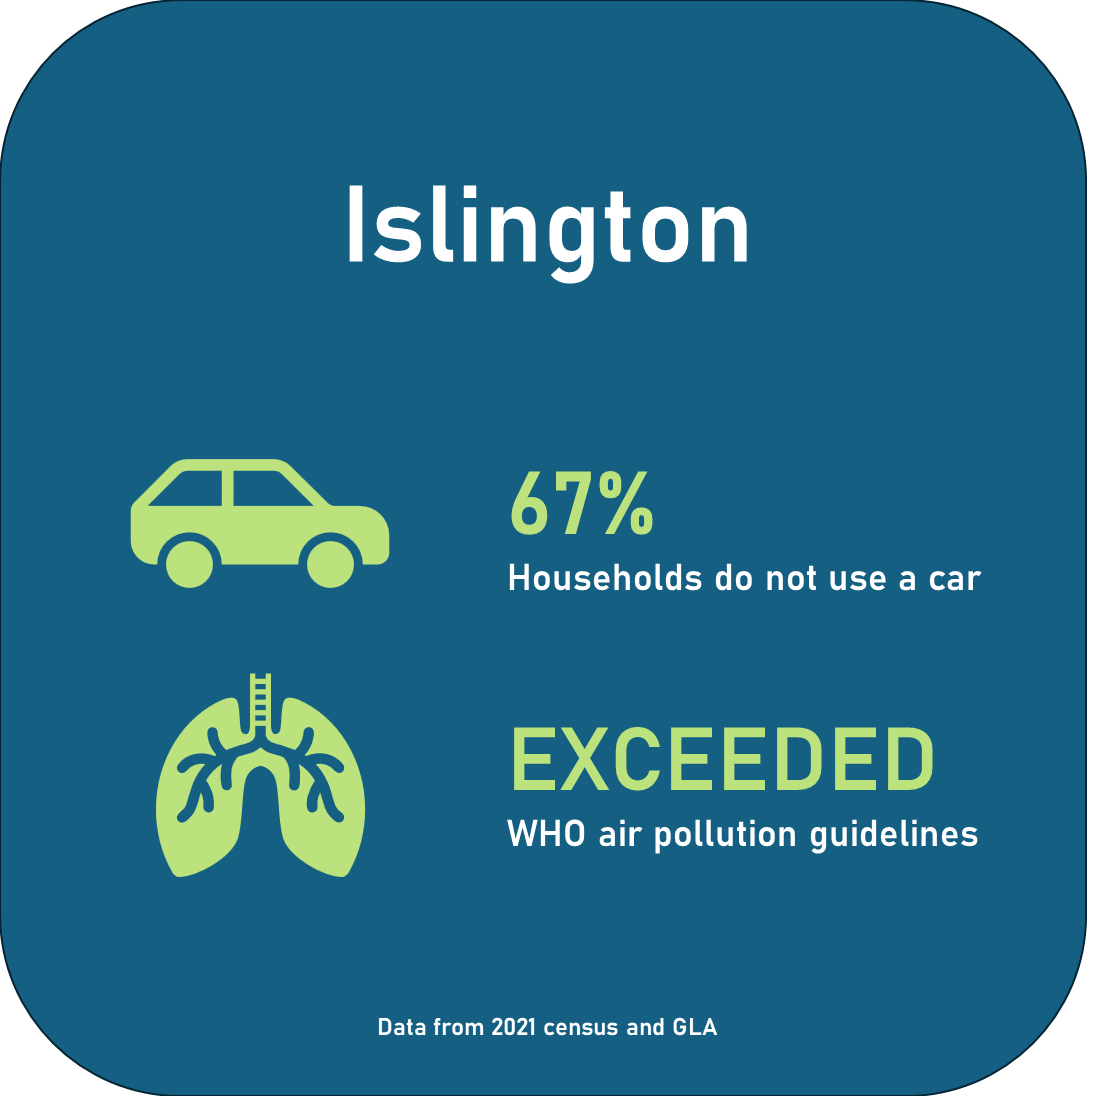 67% households do not use a car. Exceeded WHO air pollution guidelines.